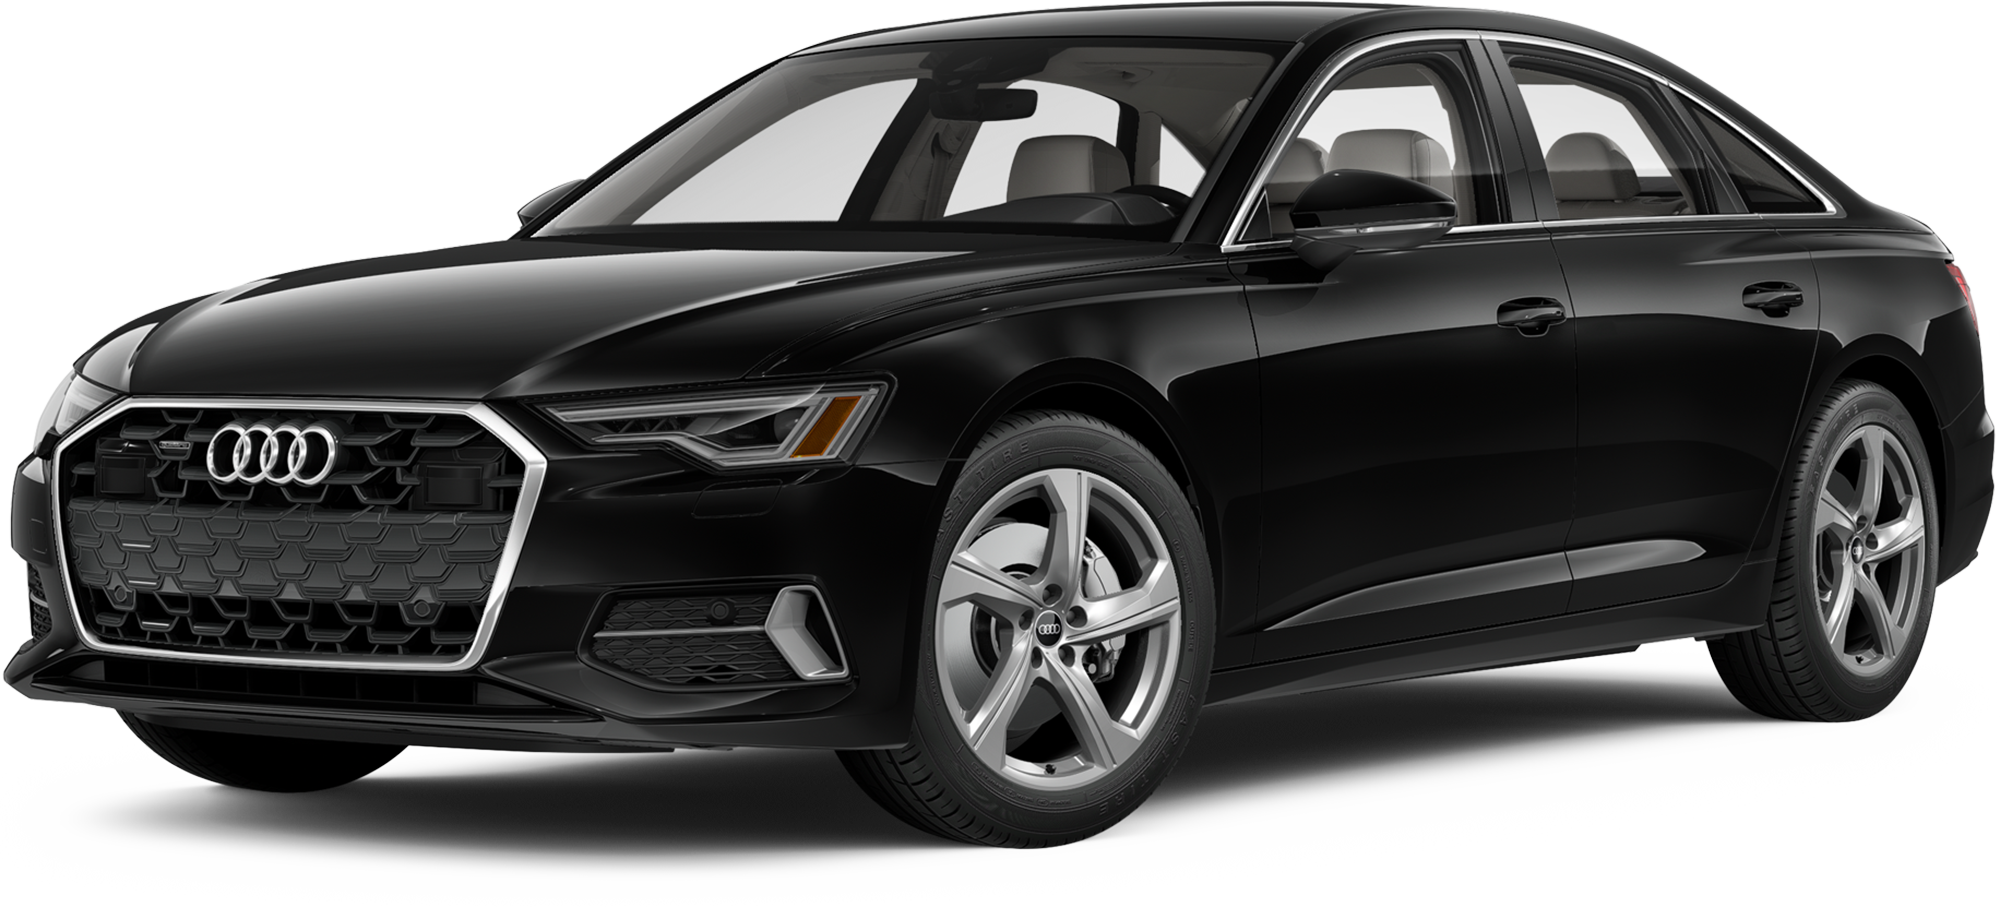 Audi Incentives, Rebates, Specials in , - Audi Finance and Lease Deals